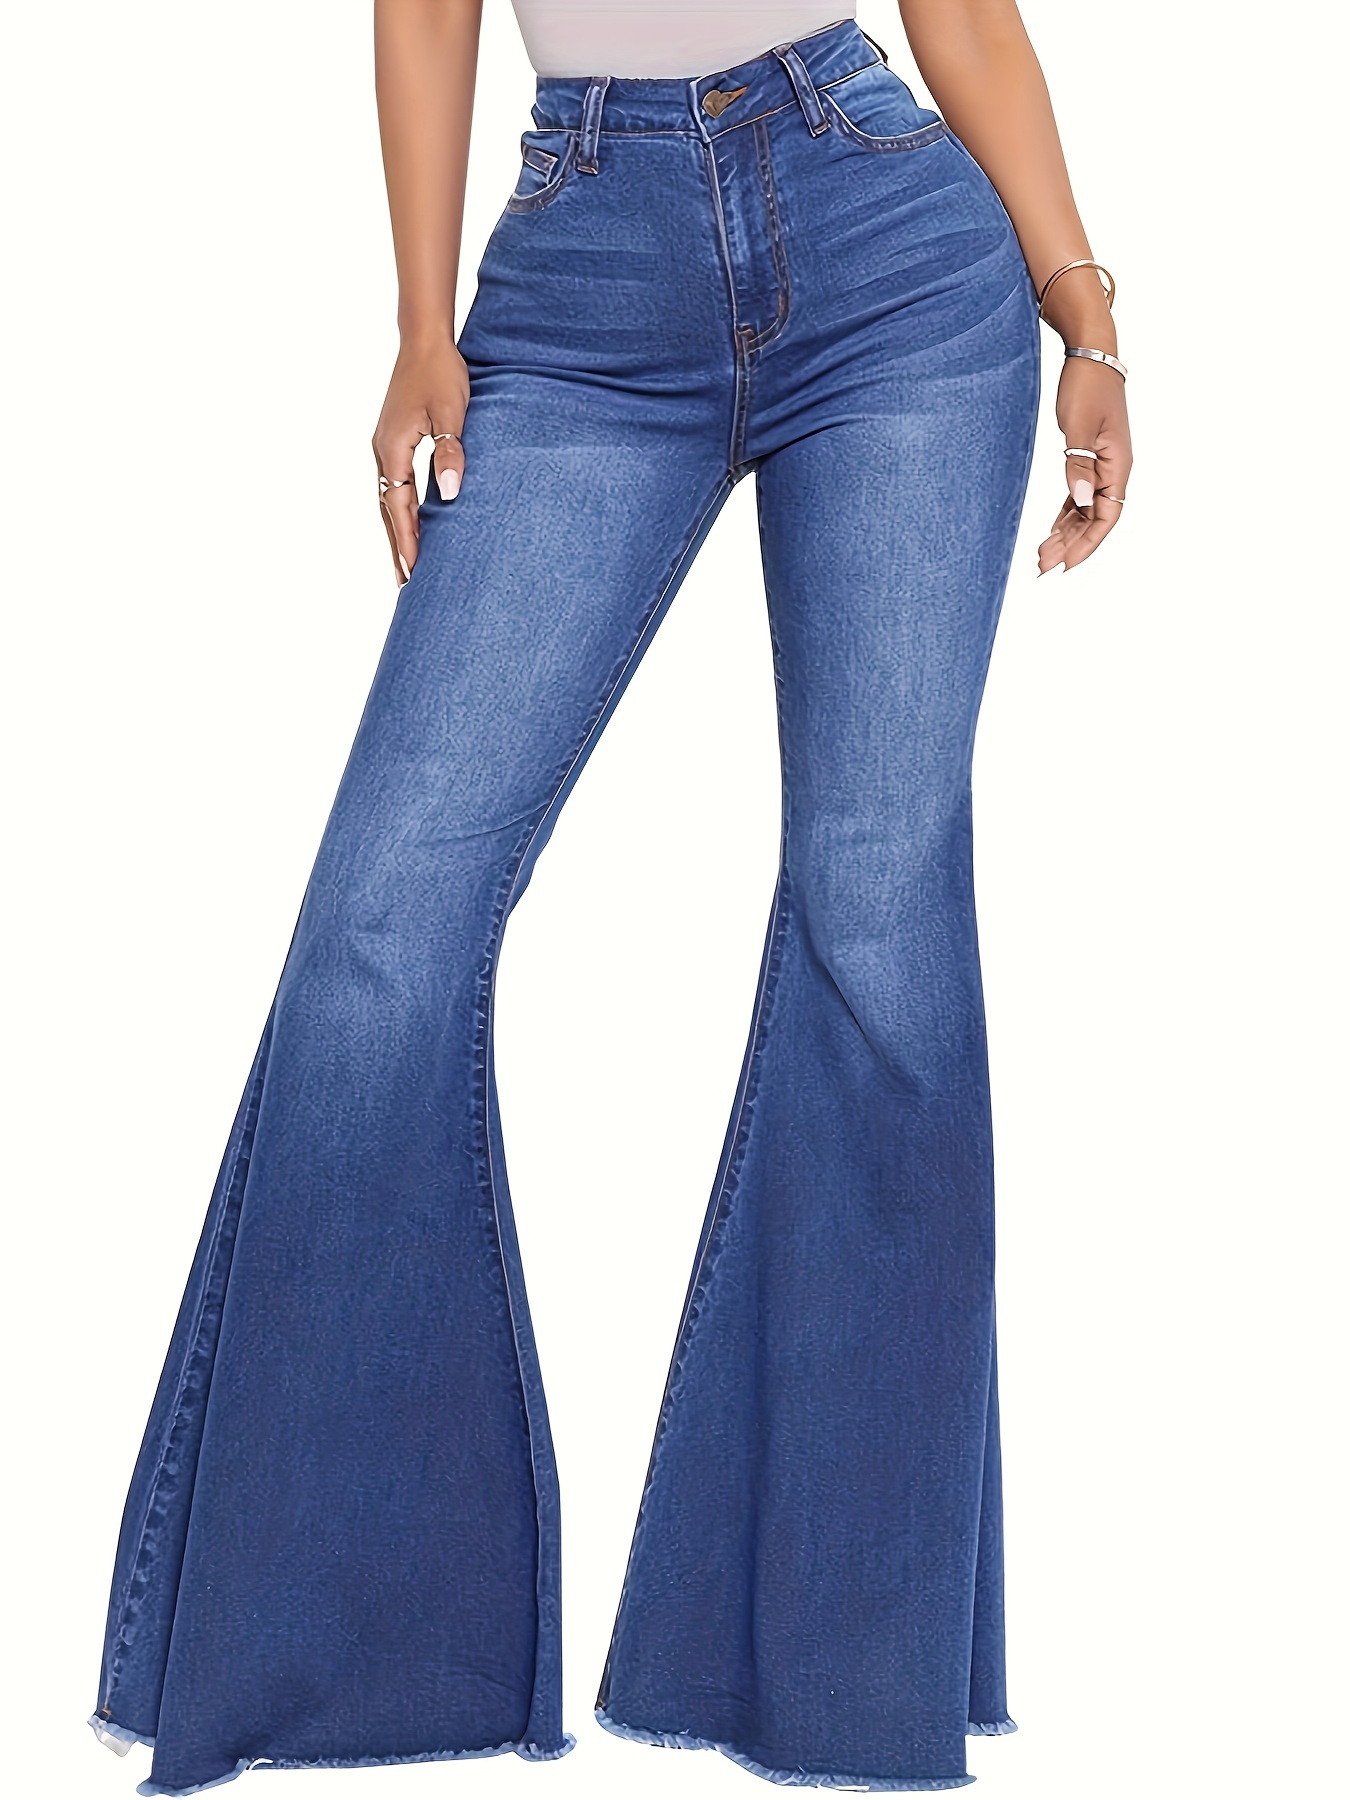 Laced Bell-bottom Jeans, Stretchy Mid-rise Boot Cut Flared Leg